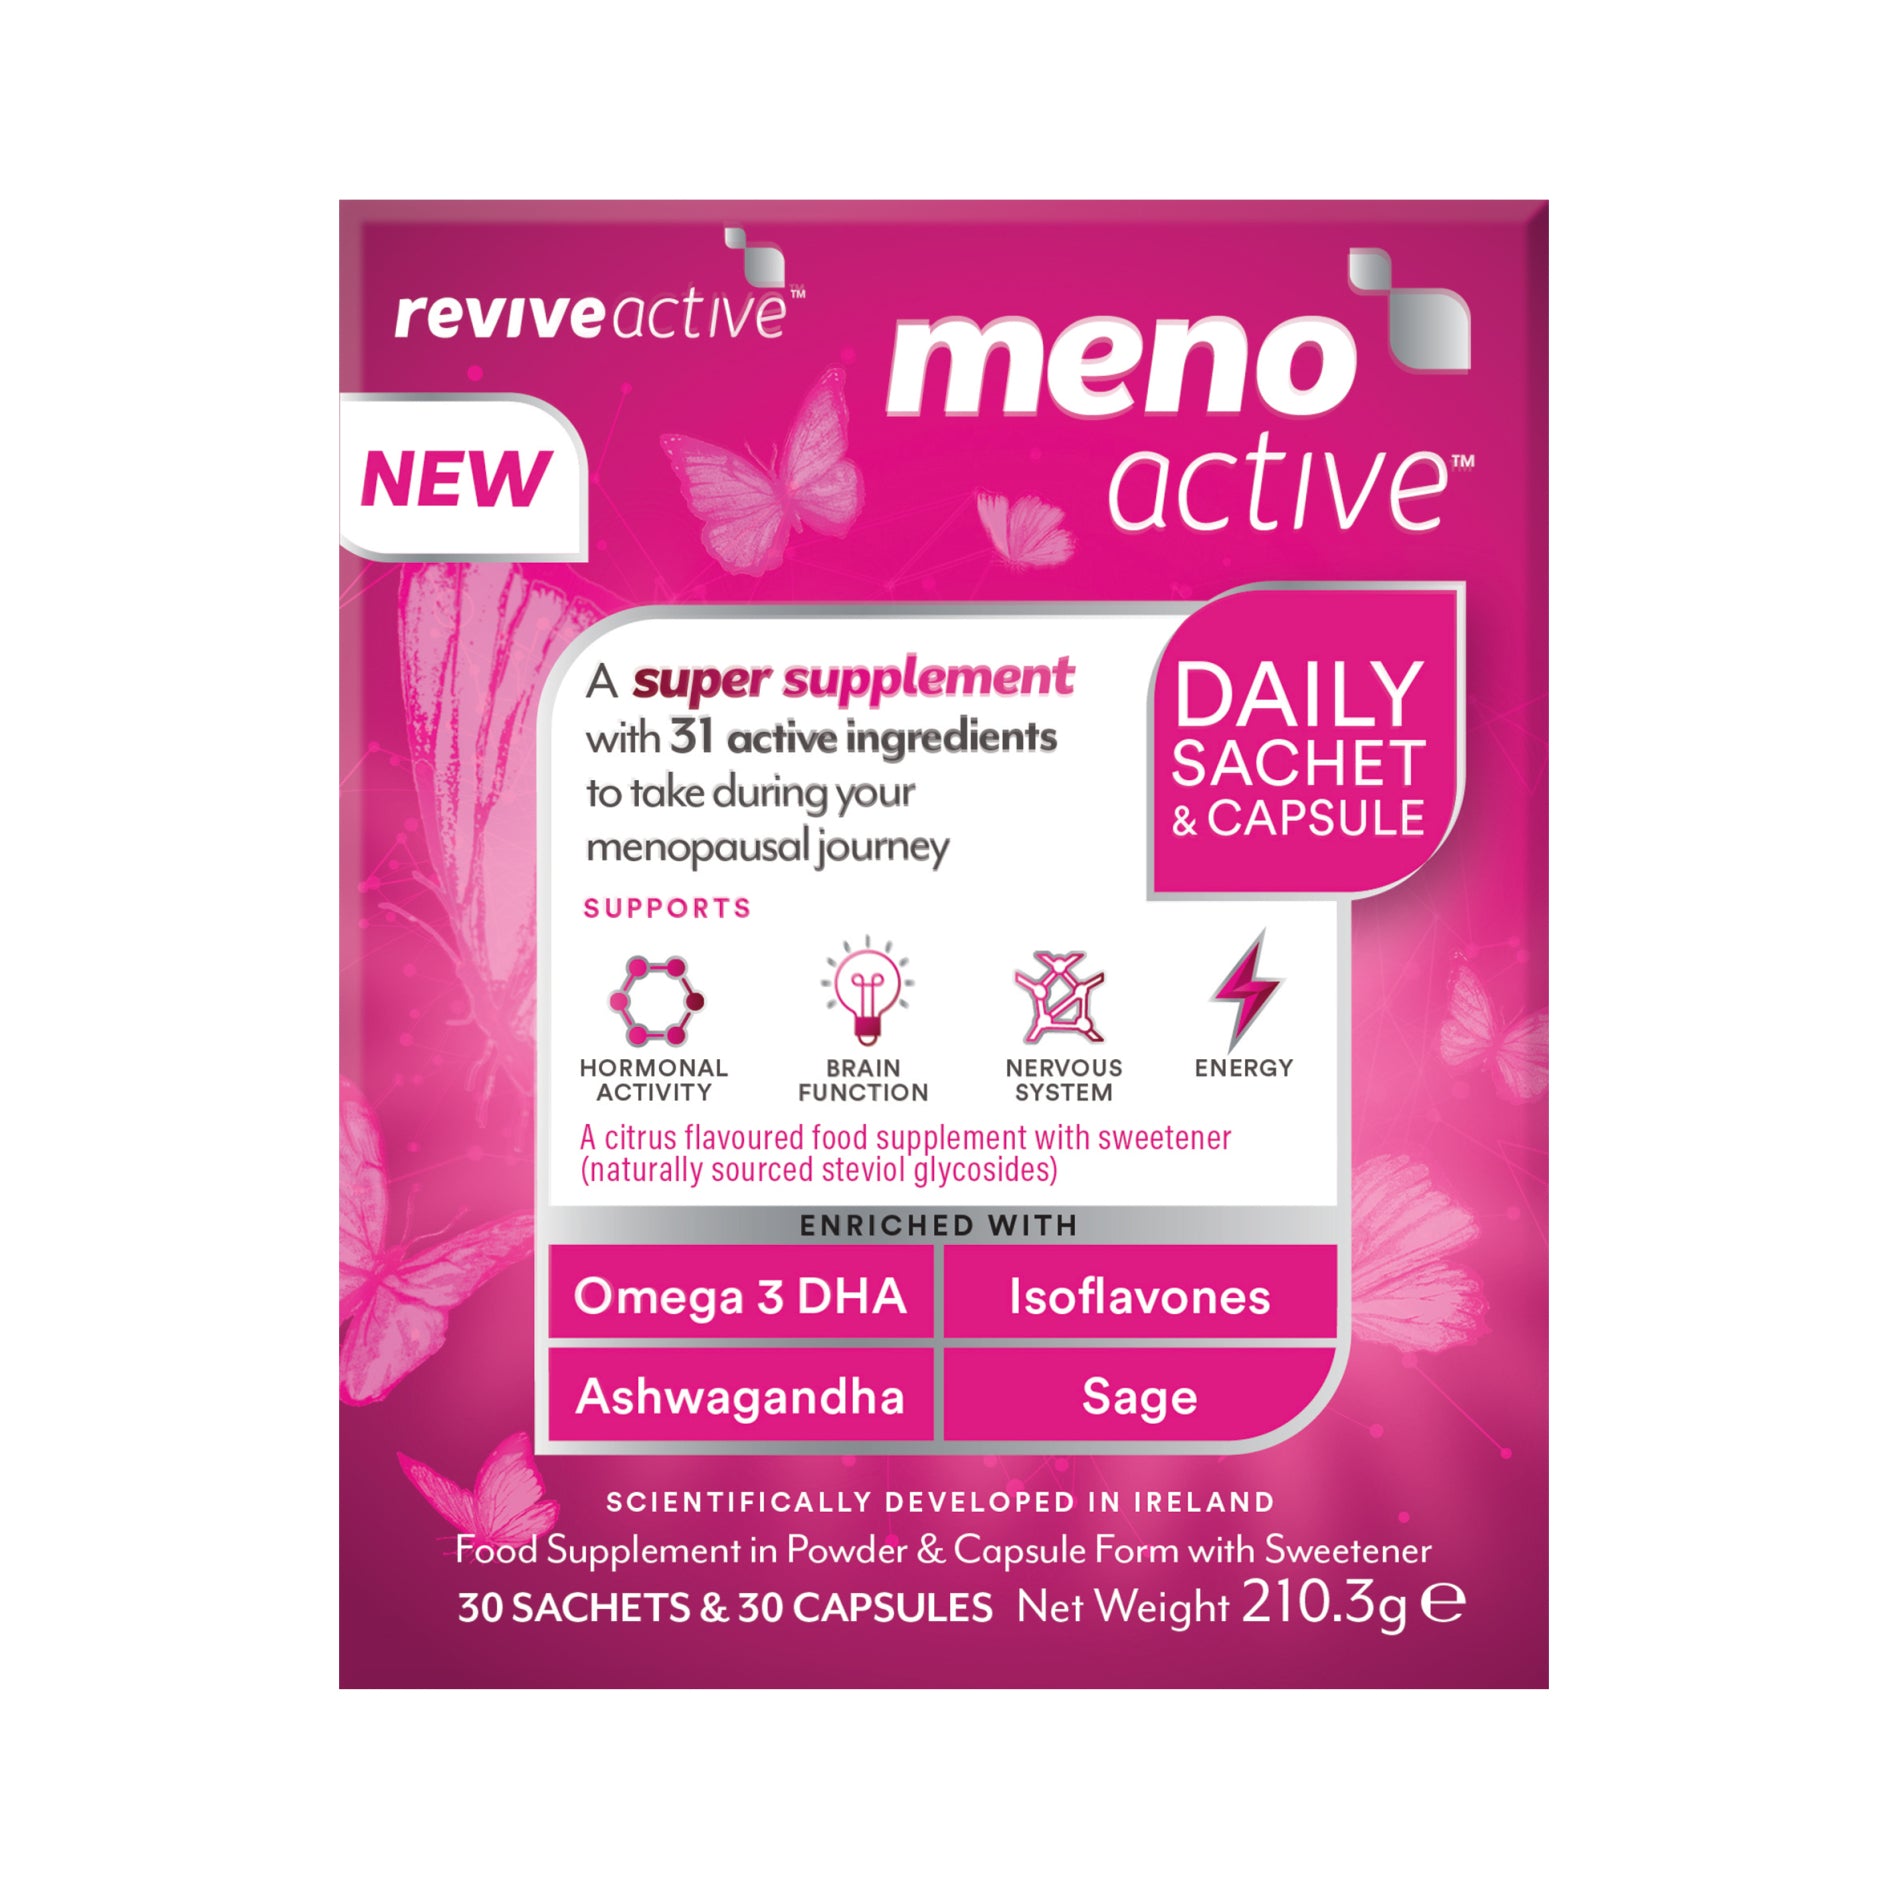 Revive Active Meno Active Menopause Supplements for Women 30 Day Pack